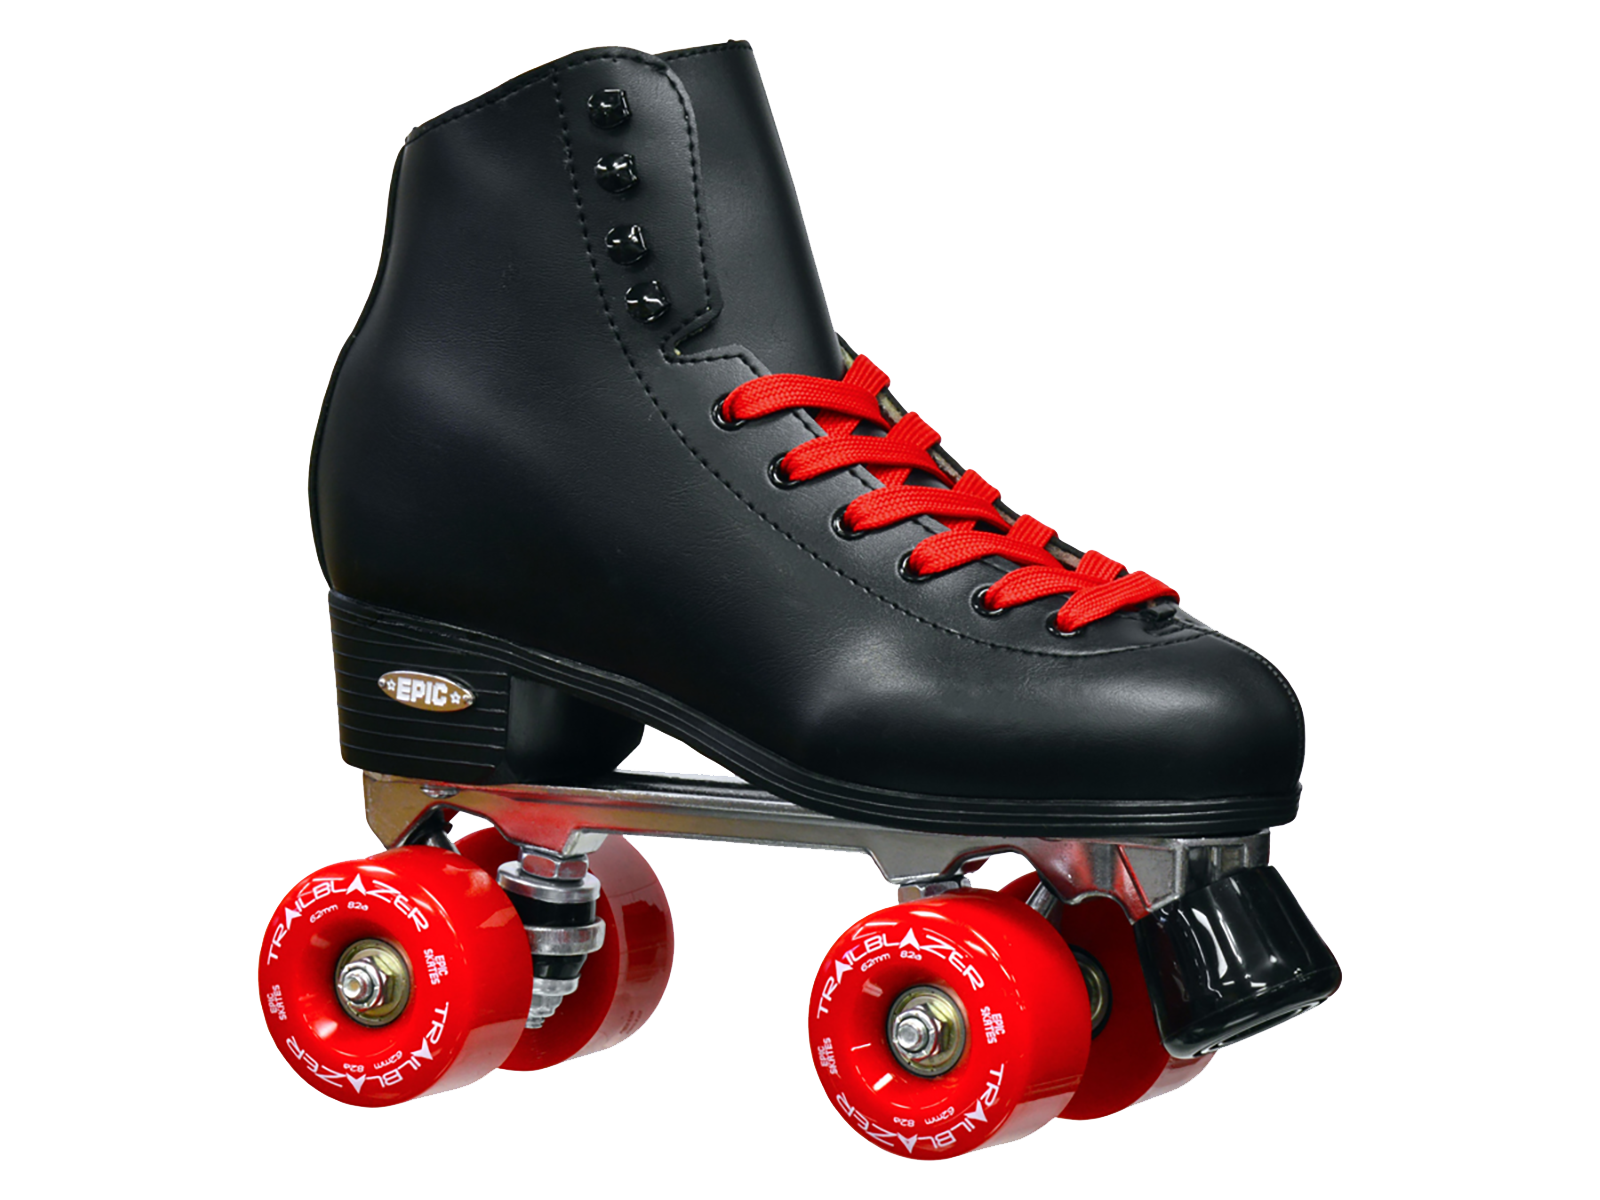 Epic Skates Classic Black High-Top Quad Roller Skates with Pink Wheels Size 8 